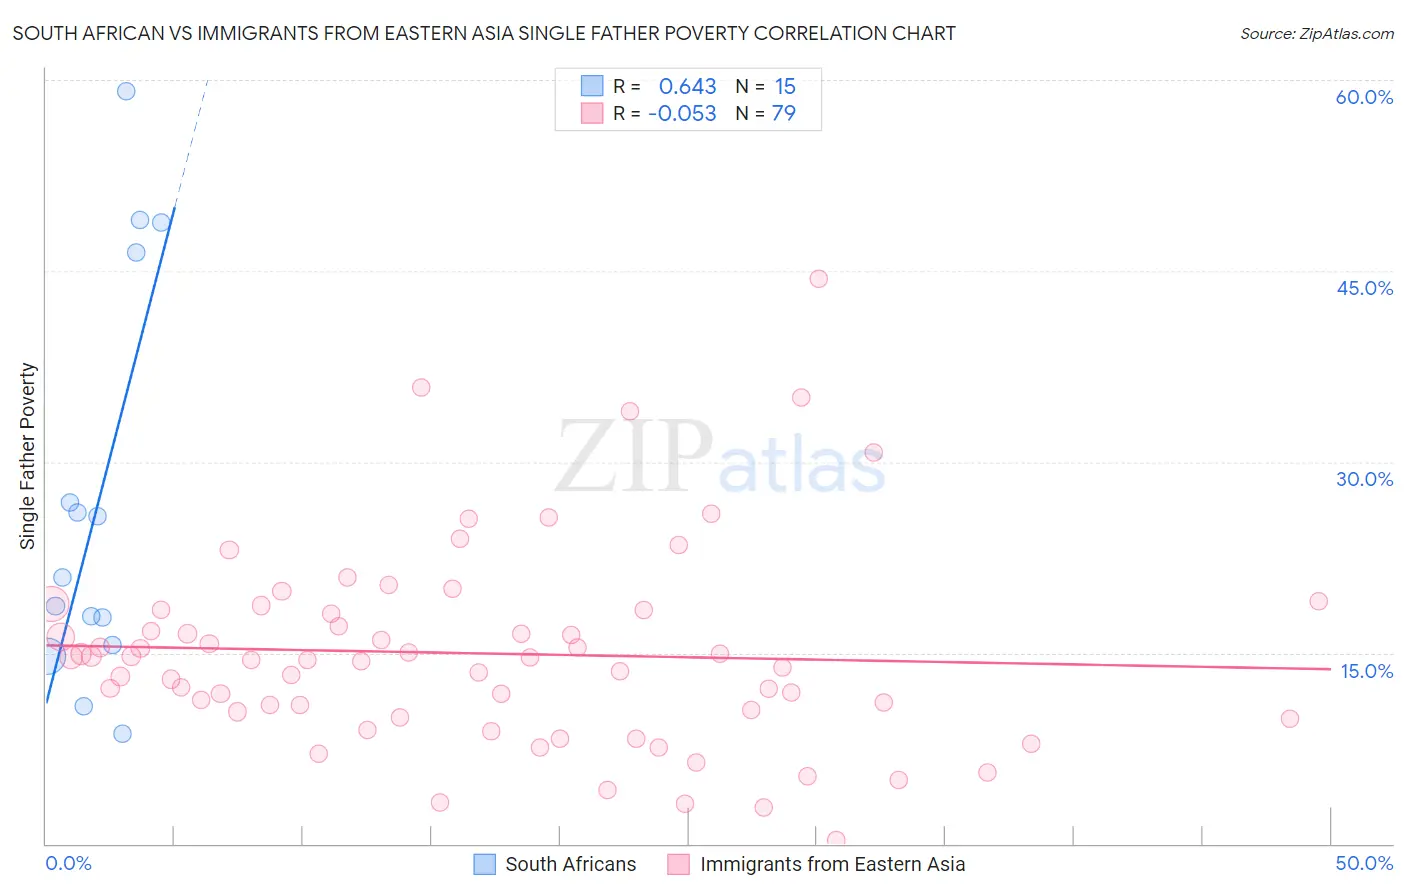 South African vs Immigrants from Eastern Asia Single Father Poverty